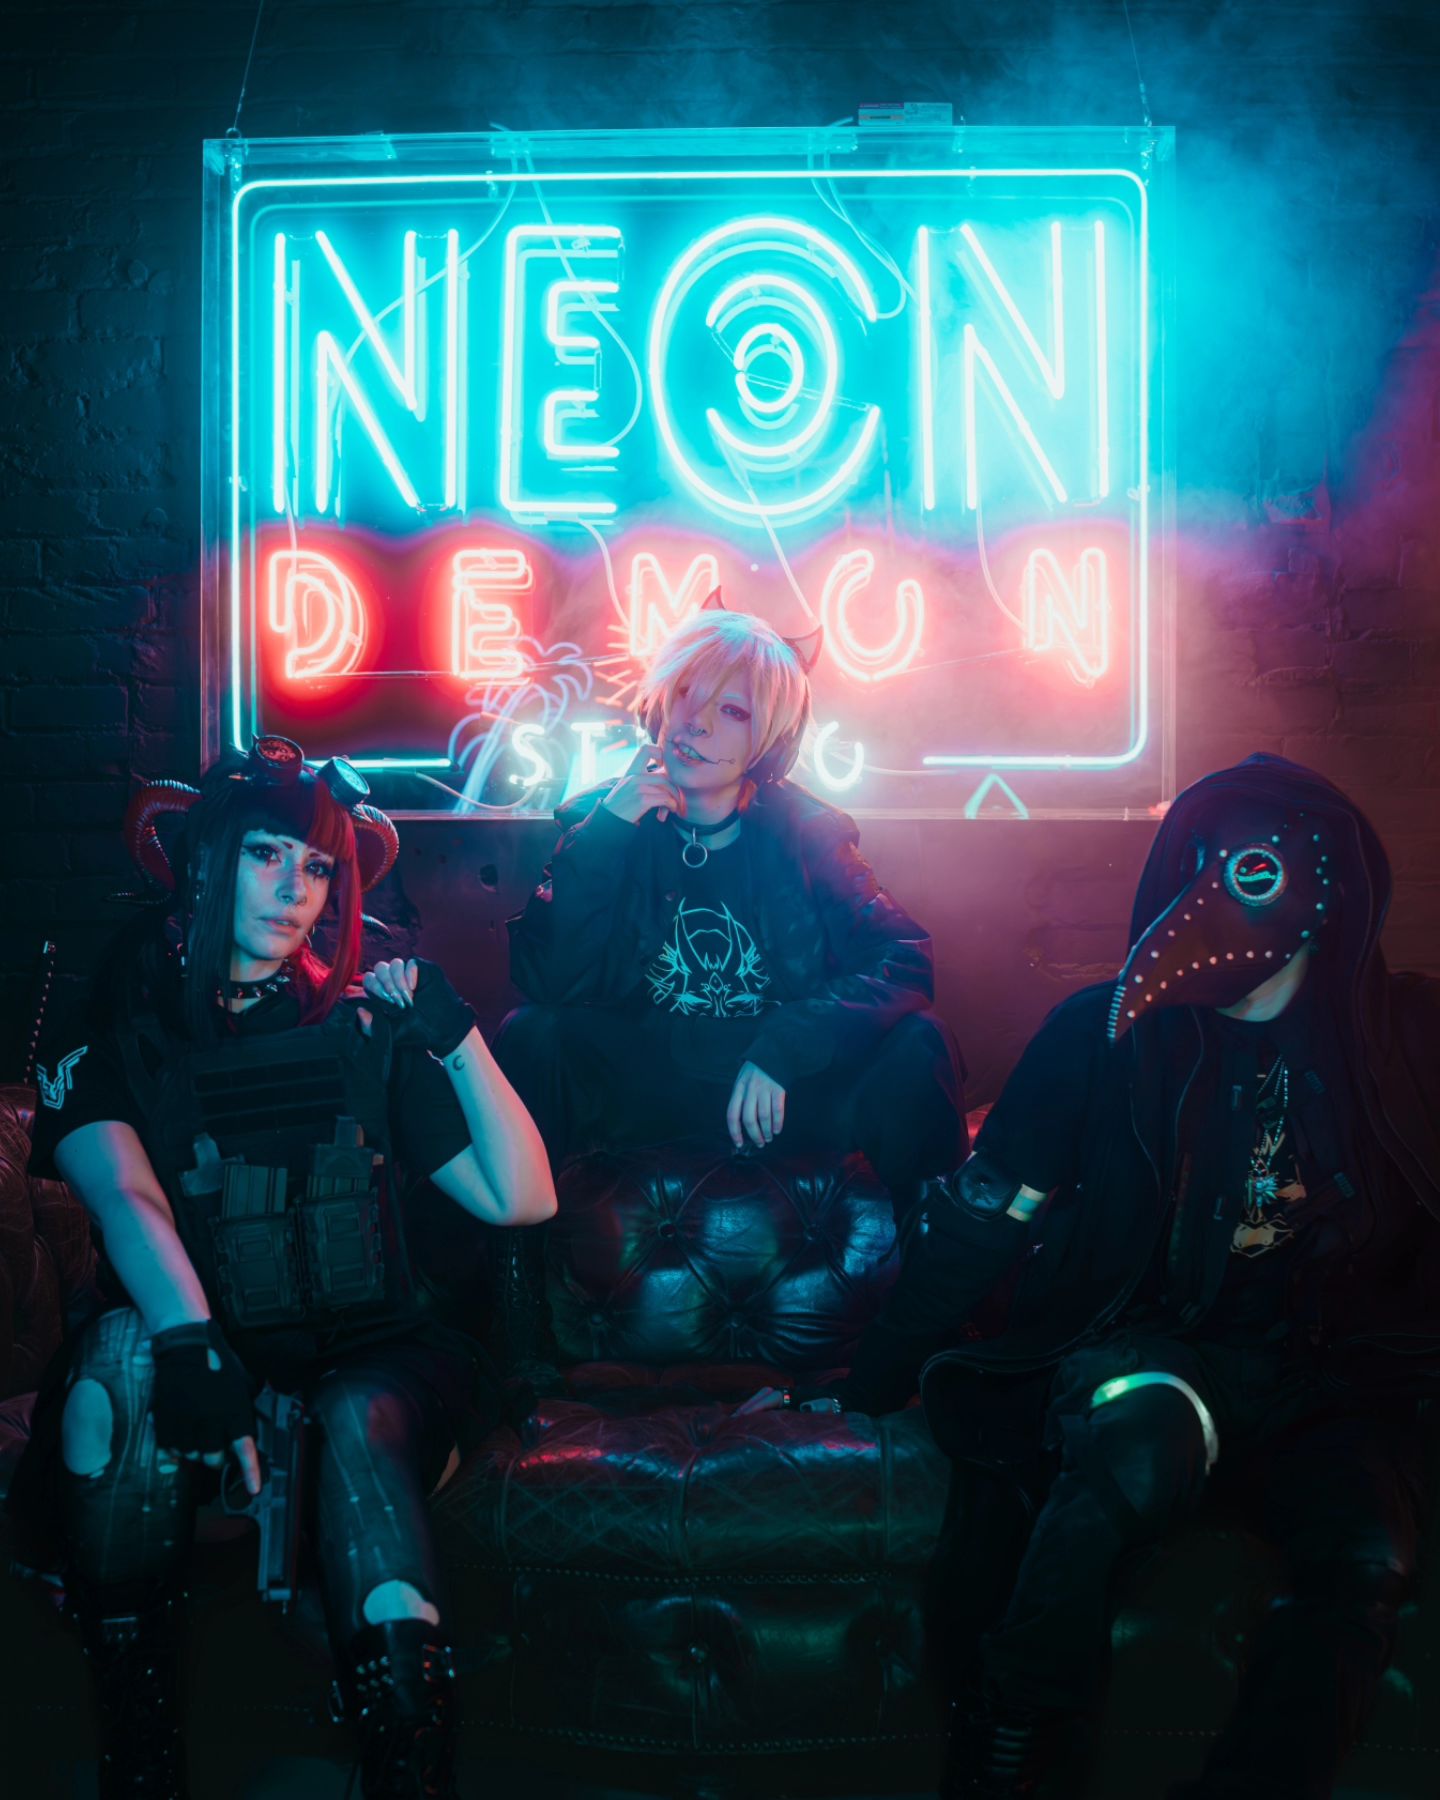 Welcome to Night City News, chooms! A new and mysterious bounty hunter group has emerged. Who are the Death Dealers?! And how fast will they rise up the ranks in Night City?
.
.
.
Models: @basicwitchz // @nek0aiartwork // @some_metal_dude
Studio: @neondemonstudio // @evilempirestudios 
.
.
.
#NeonDemonStudio #neonlights #neonsign #metalhead #gothfashion #gothstyle #nightcity #cyberpunk2077 #techwearninja #techwearnexus #neotokyo #neonvibes #cybercity #techwearfashion #portrait_shooterz #portraitsvisuals #techwear  #portrait_vision #edgerunners  #the6ix #tdot #techwearclub #streetwear #PortraitPage #warcore  #cosplay #torontocosplay #punkrock